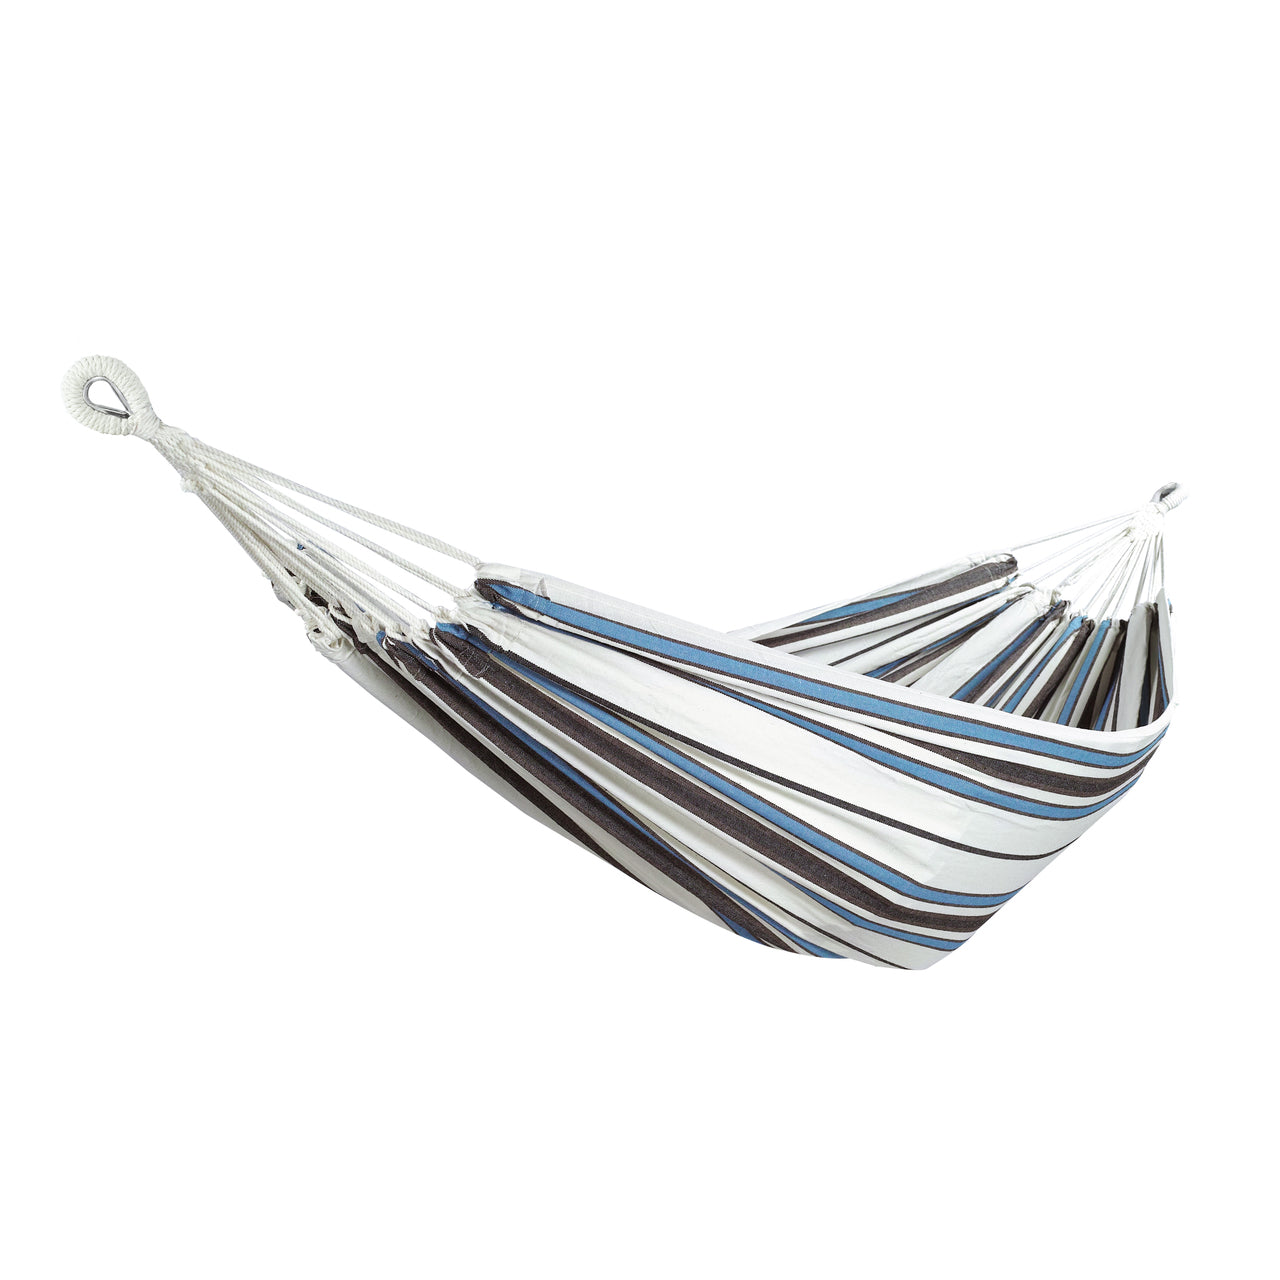 Bliss Hammocks 60-inch Wide Double Hammock in a Bag with Hand-woven Rope loops in the Sunday Volleyball  Stripe variation.